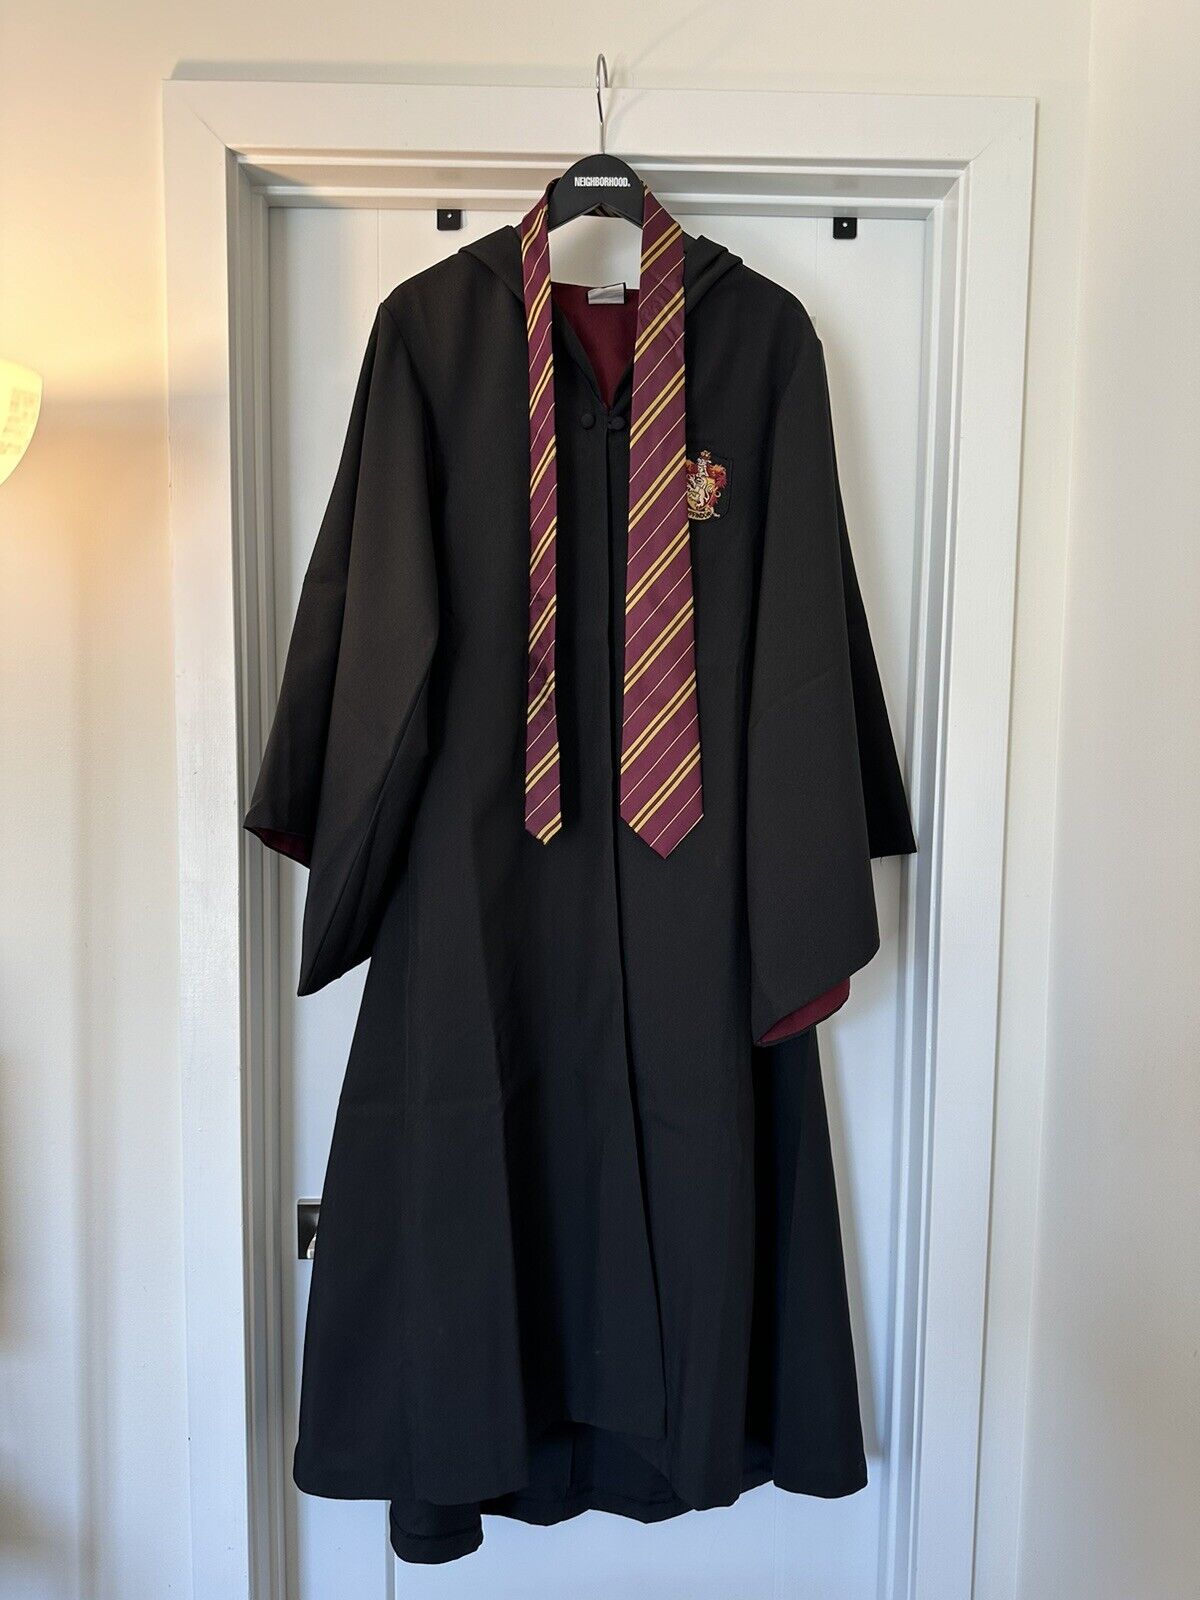 Harry Potter Gryffindor Robe Tie Brand New With Tag Size Small Universal Studios